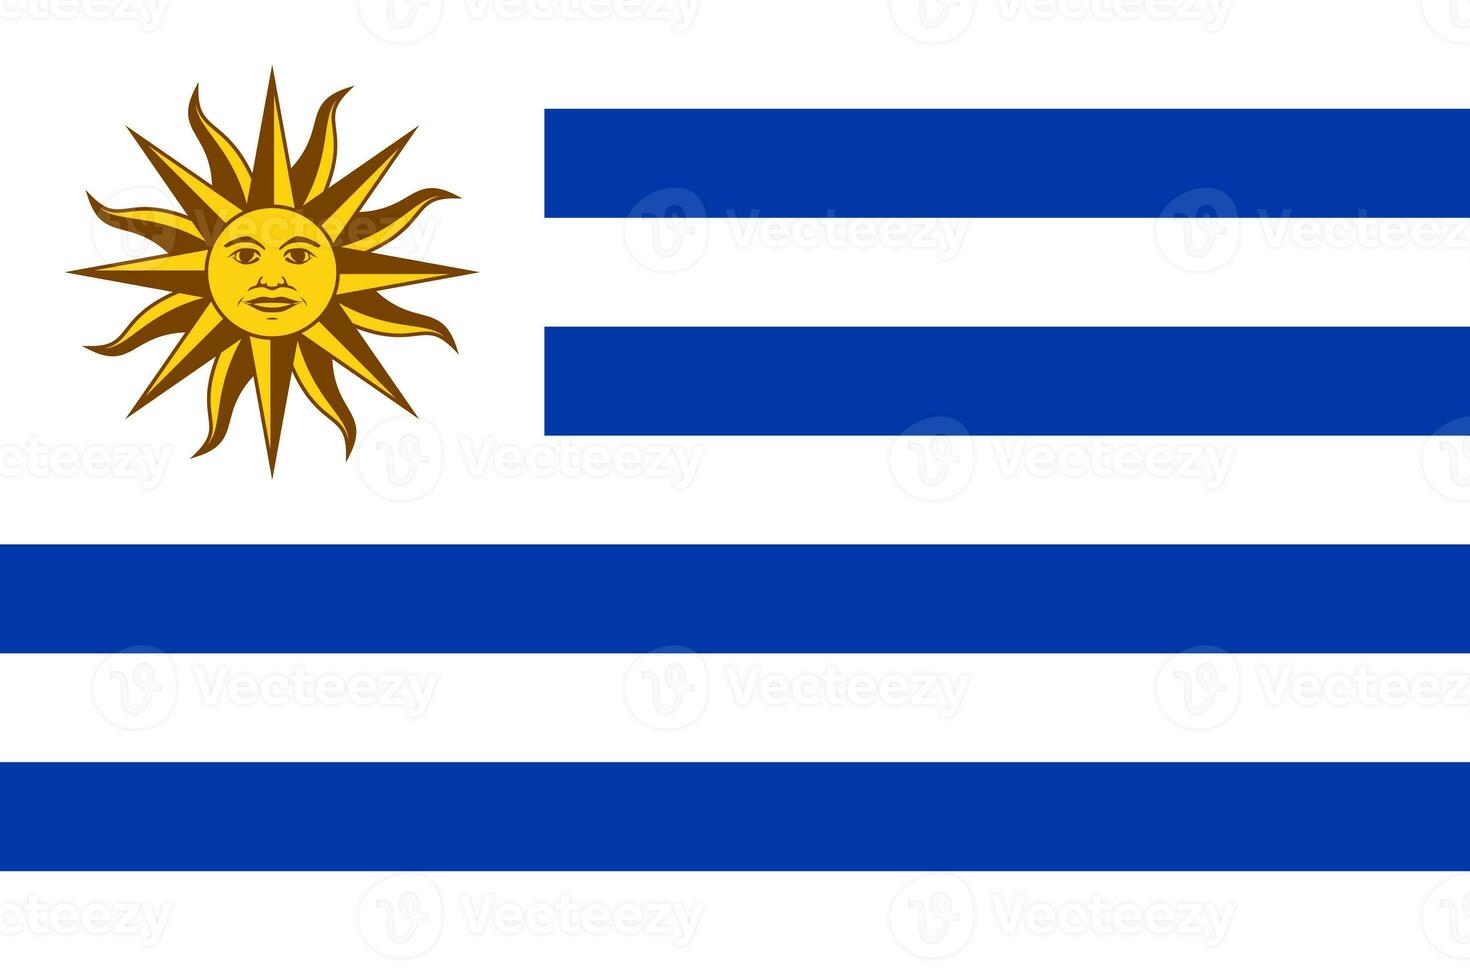 Flag of the Eastern Republic of Uruguay. The official colors and proportions are correct. State flag of the Eastern Republic of Uruguay. Eastern Republic of Uruguay flag illustration. photo